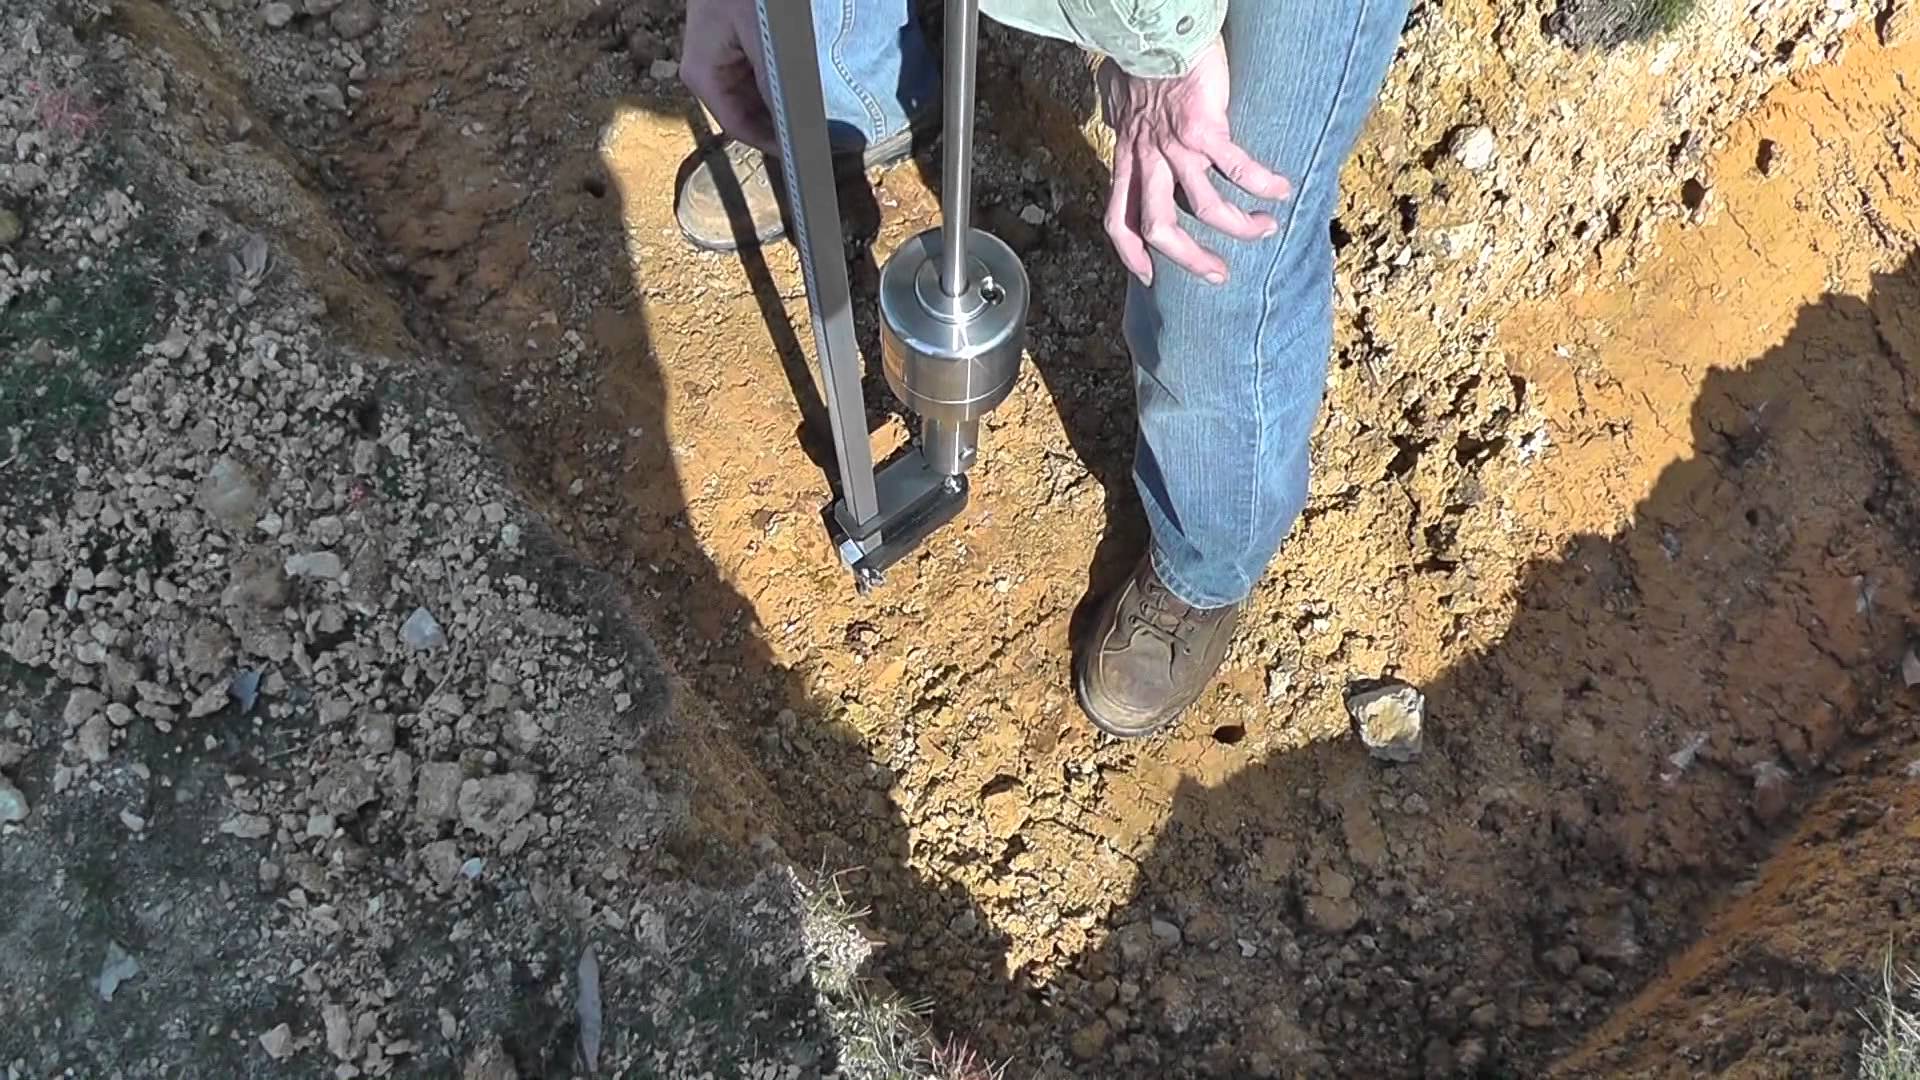 Types of Soil Tests for Building Construction